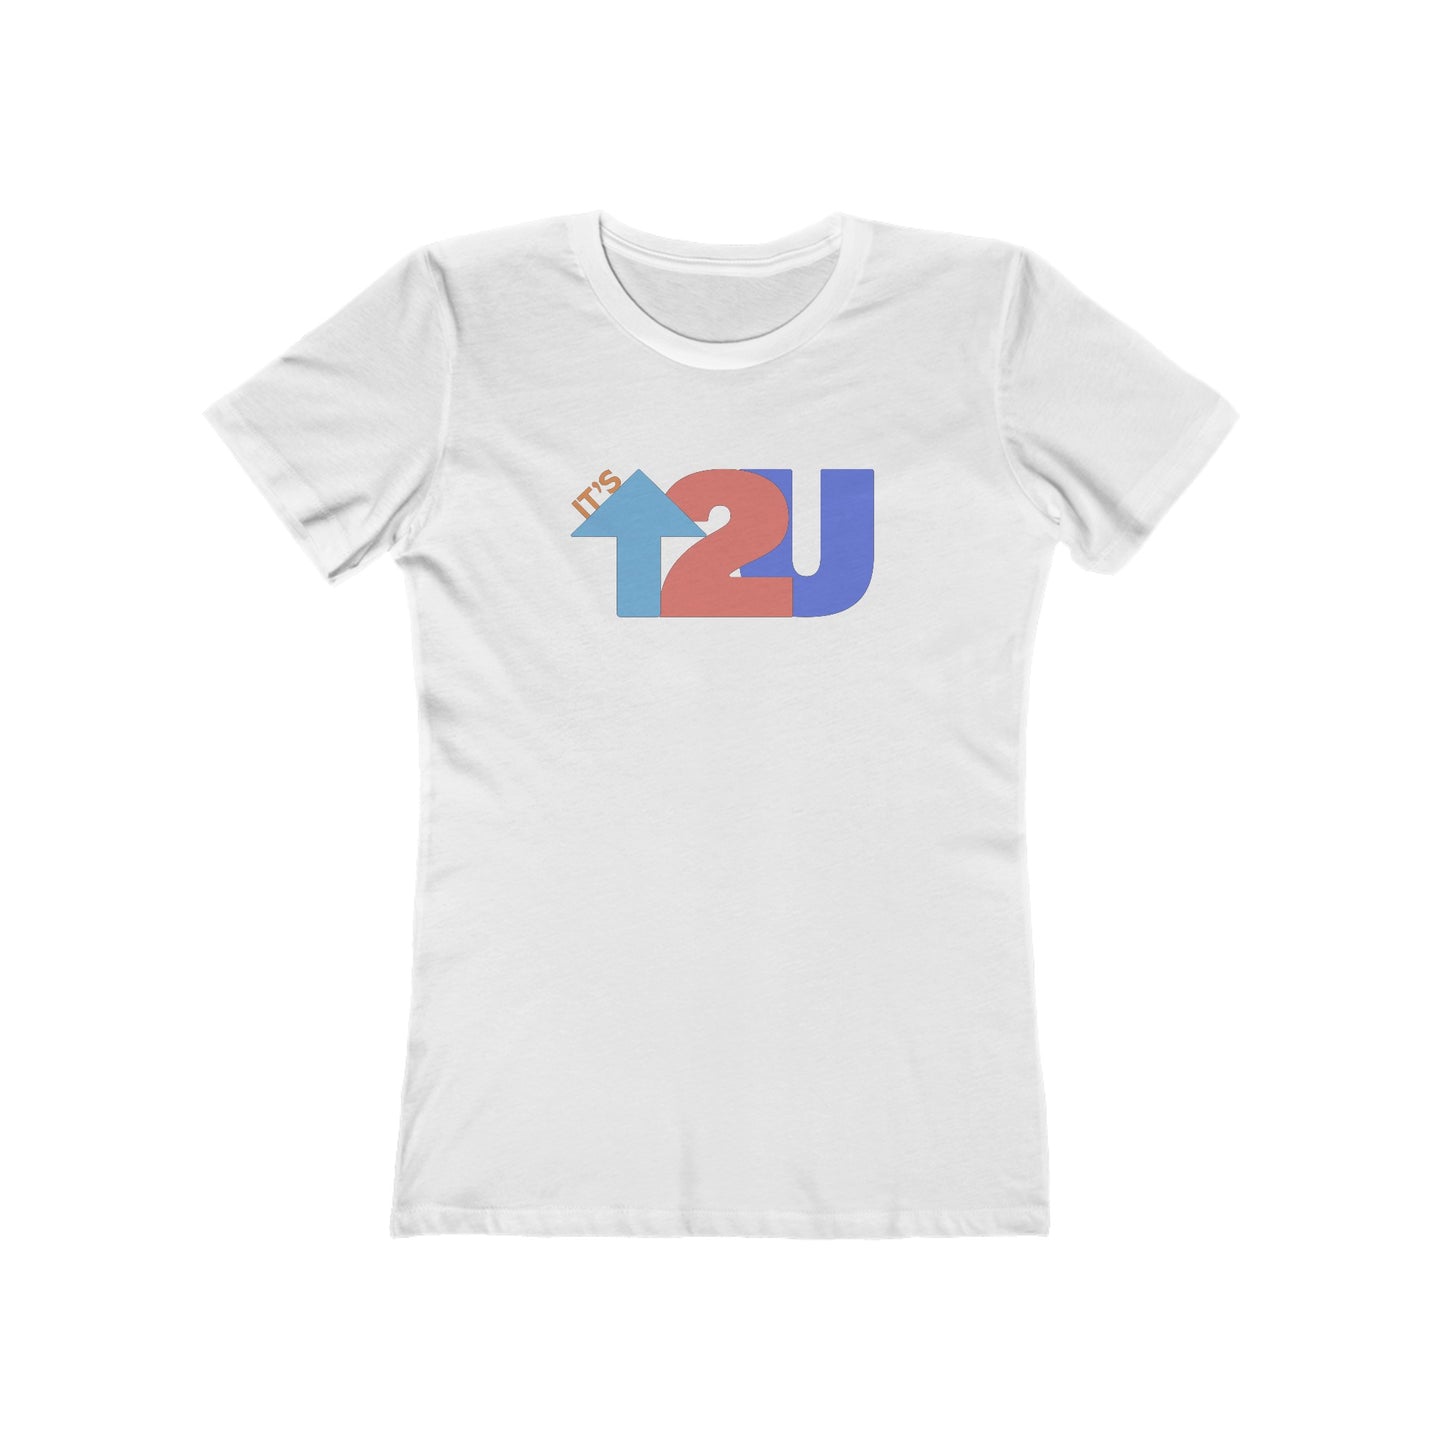 It's Up To You - Women's T-Shirt